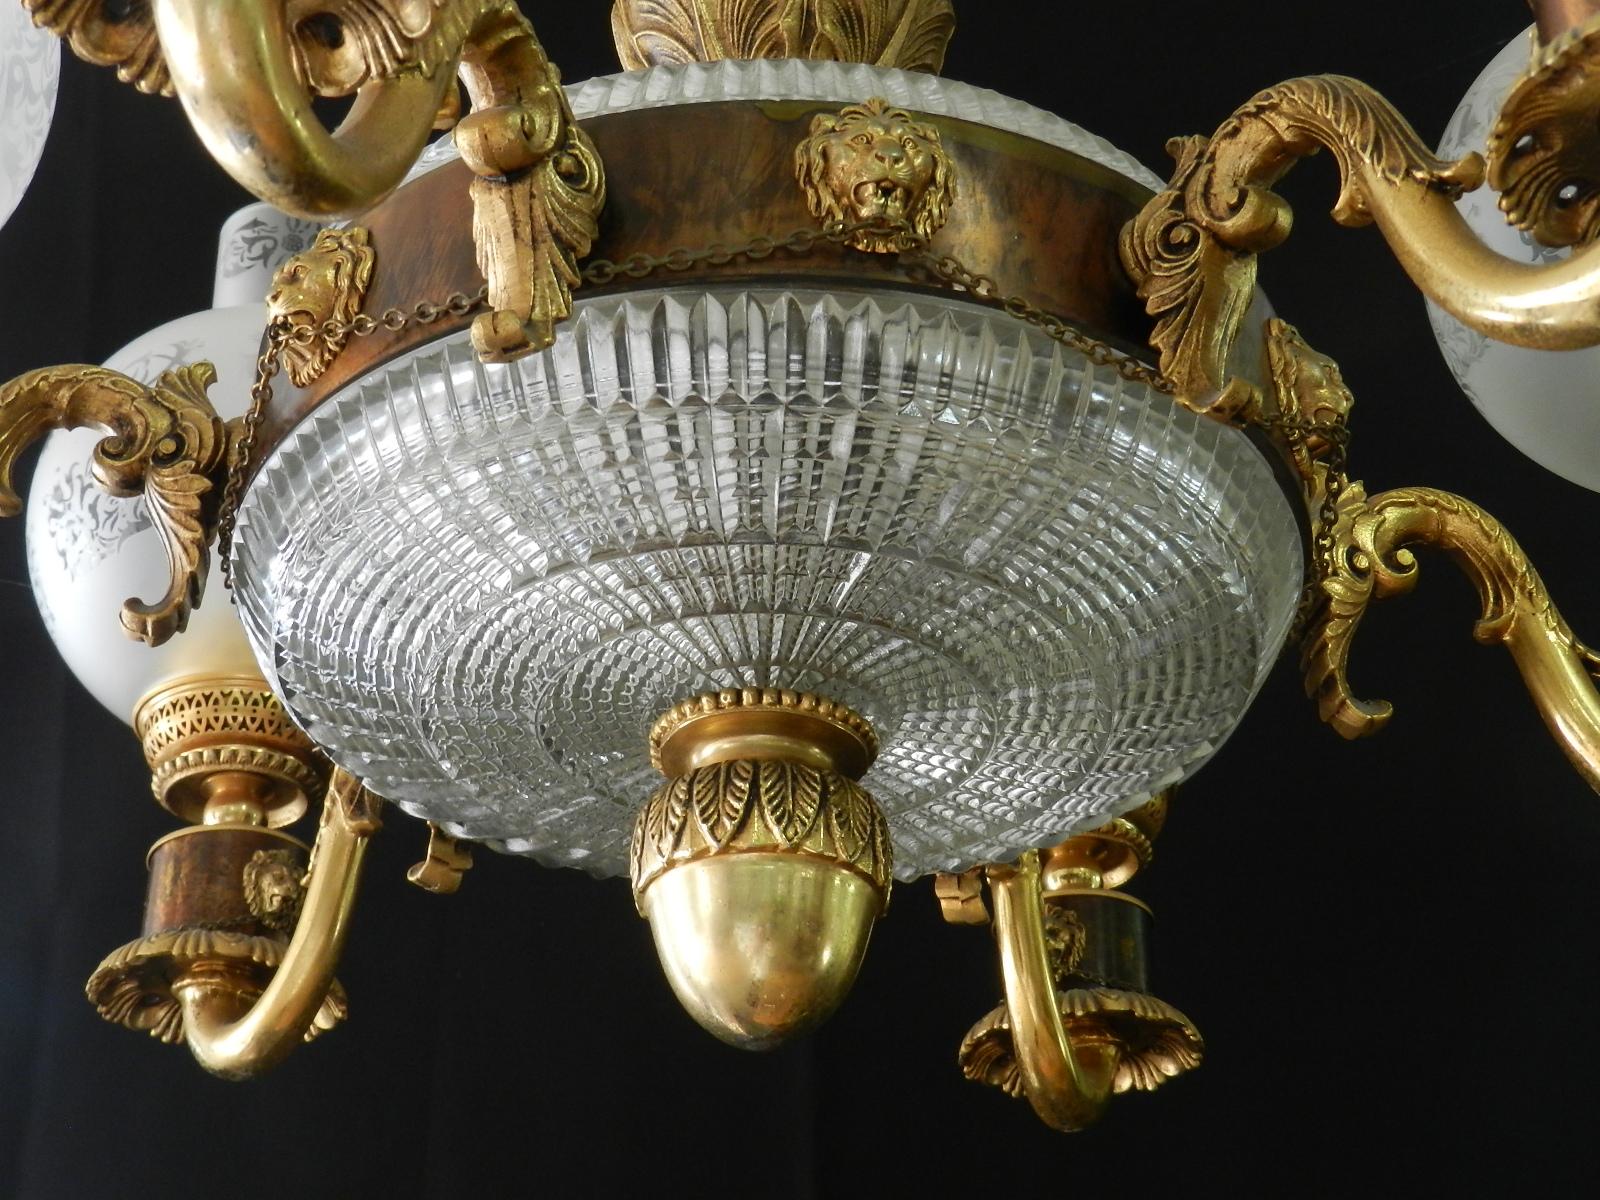 French neoclassical chandelier with lions head decoration superb quality attributed to Maison Baguès
Six arm chandelier with glass shades this being the largest from a set of 3 please see our other listings
Gilded Bronze
We are listing 2 other